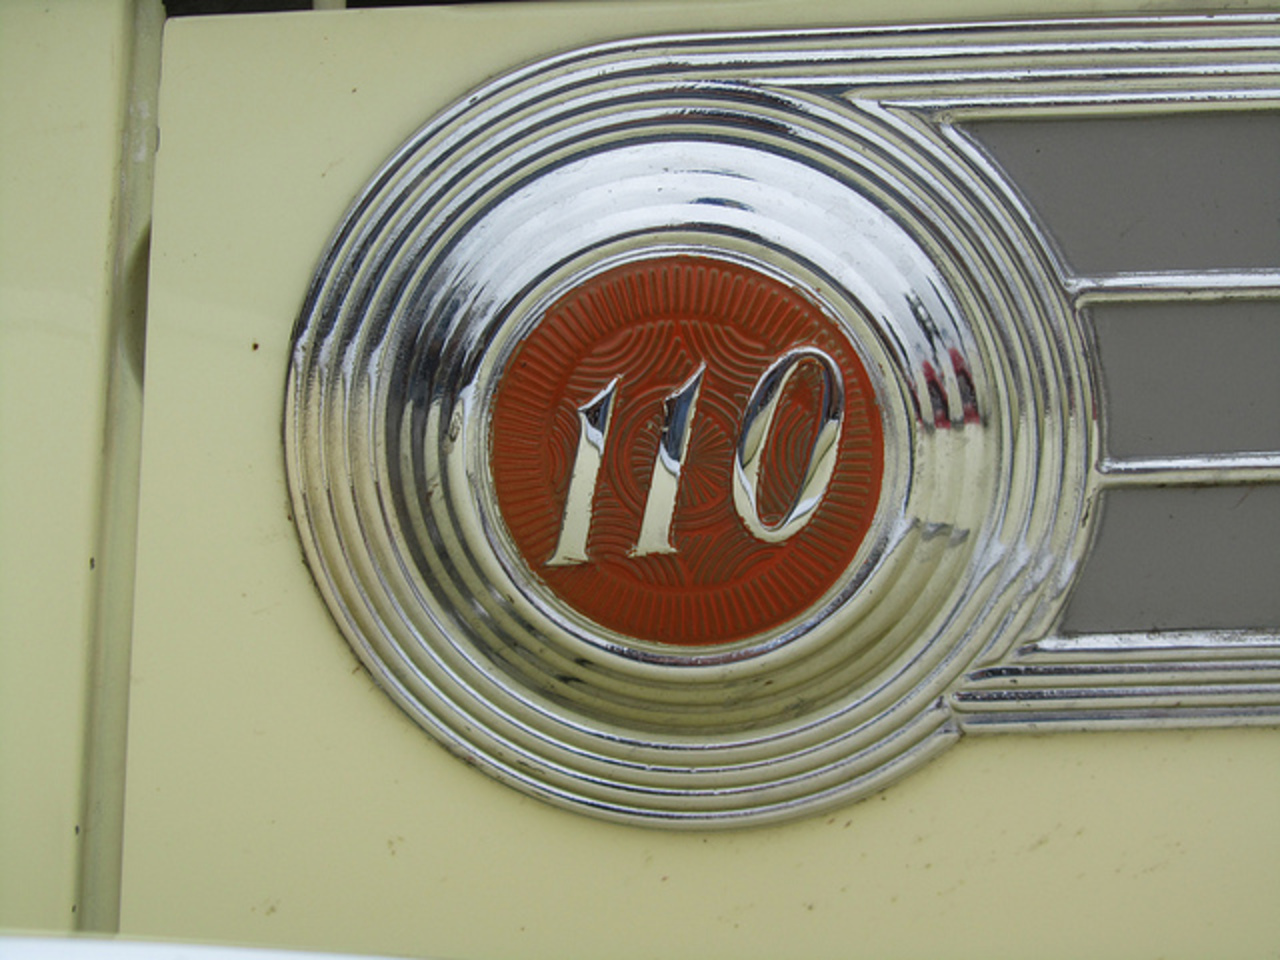 Flickr: The Vehicle name, marque, badge, logo Pool